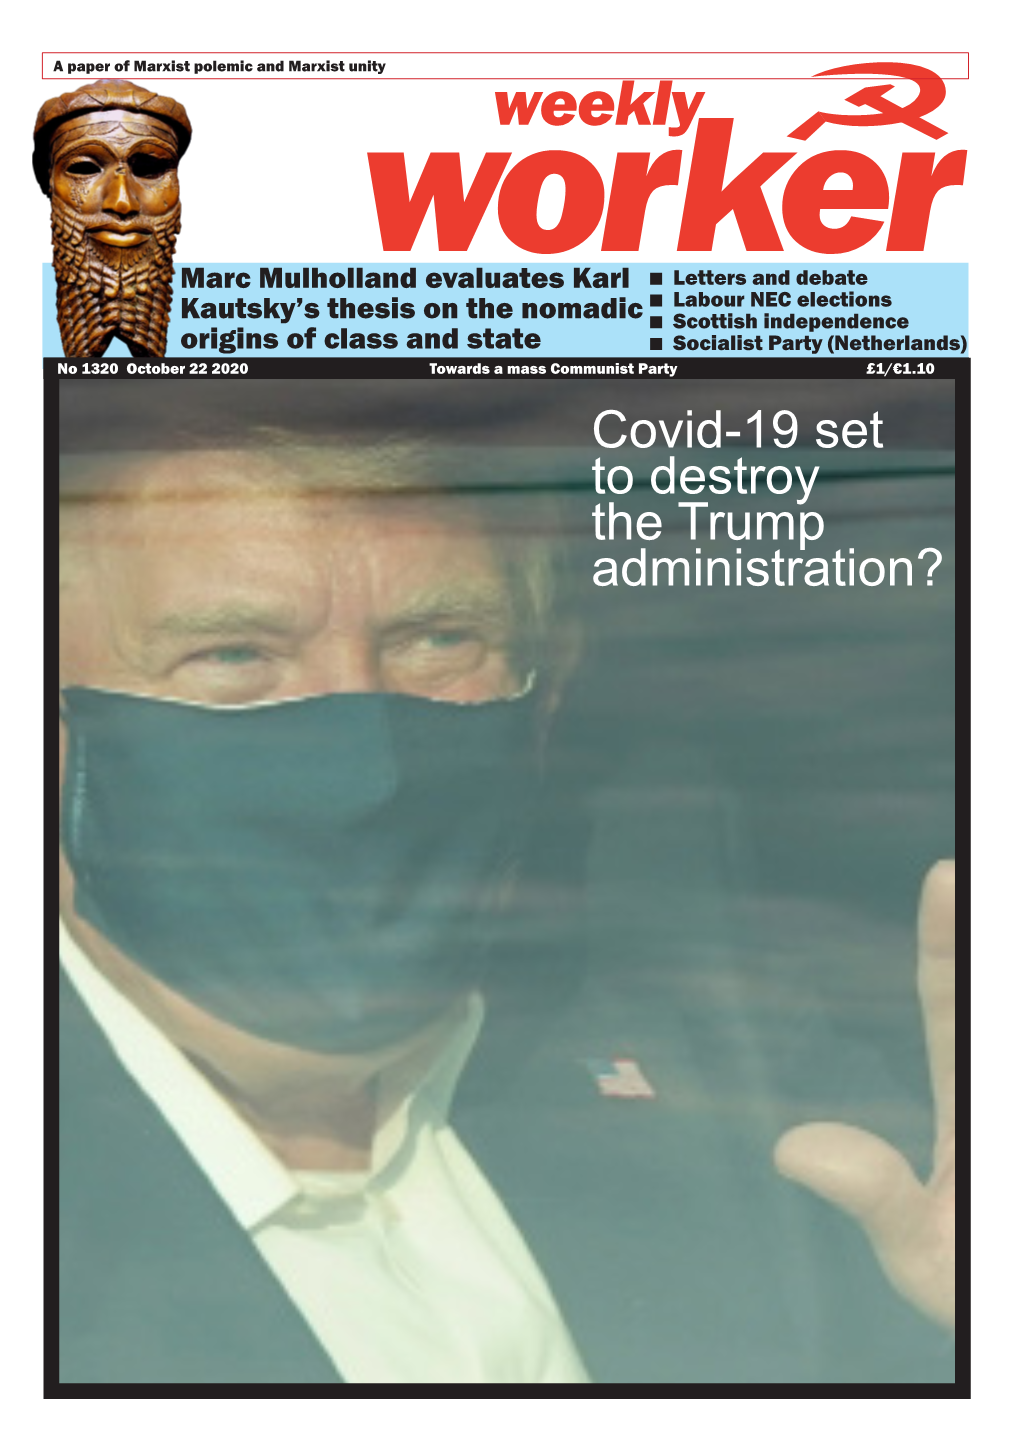 Covid-19 Set to Destroy the Trump Administration? Weekly 2 October 22 2020 1320 Worker LETTERS